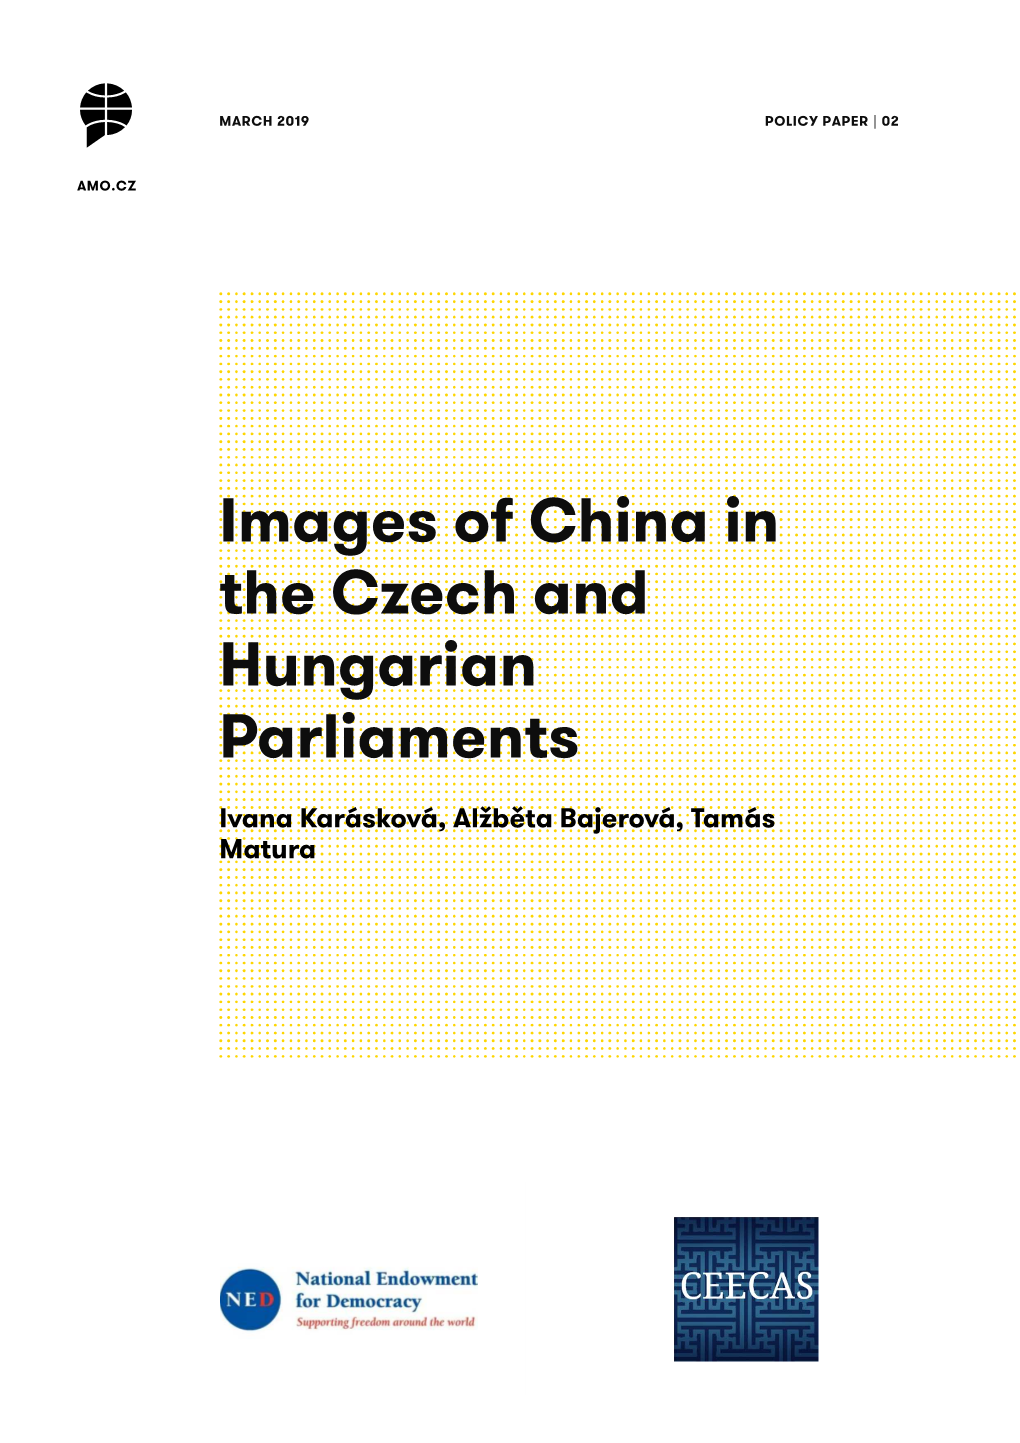 Images of China in the Czech and Hungarian Parliaments